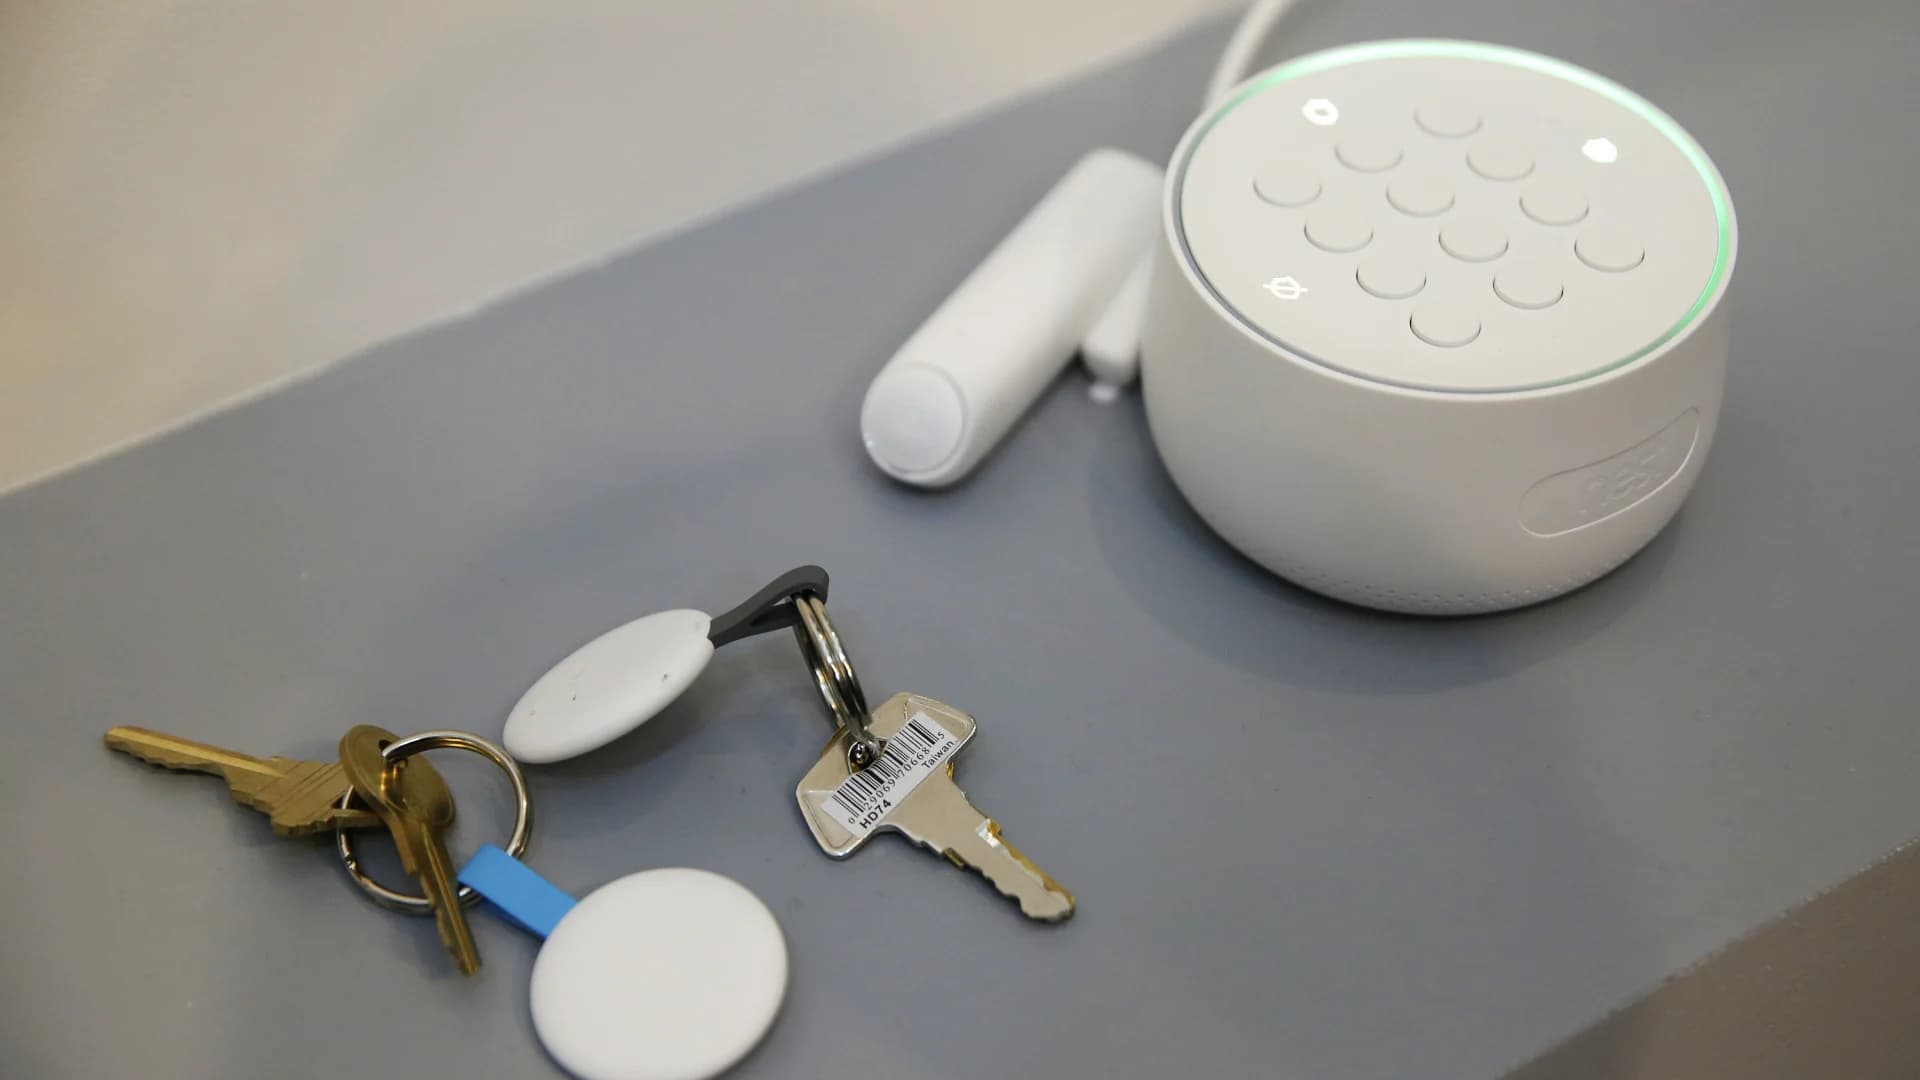 6 things you can do right now to protect your smart home devices from hackers